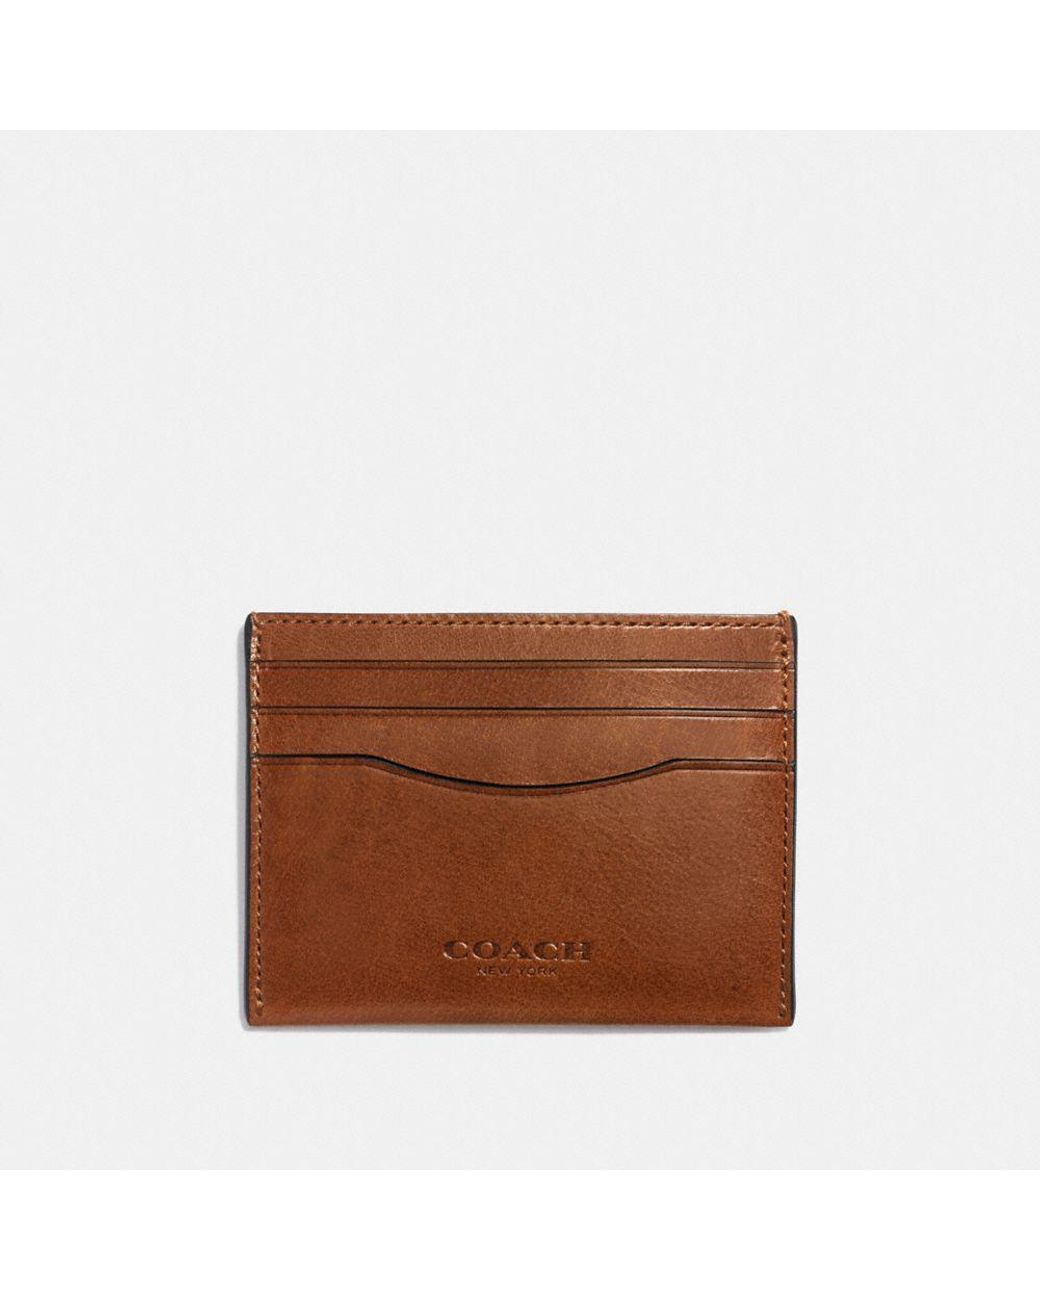 Coach Leather Card Wallet - Saddle